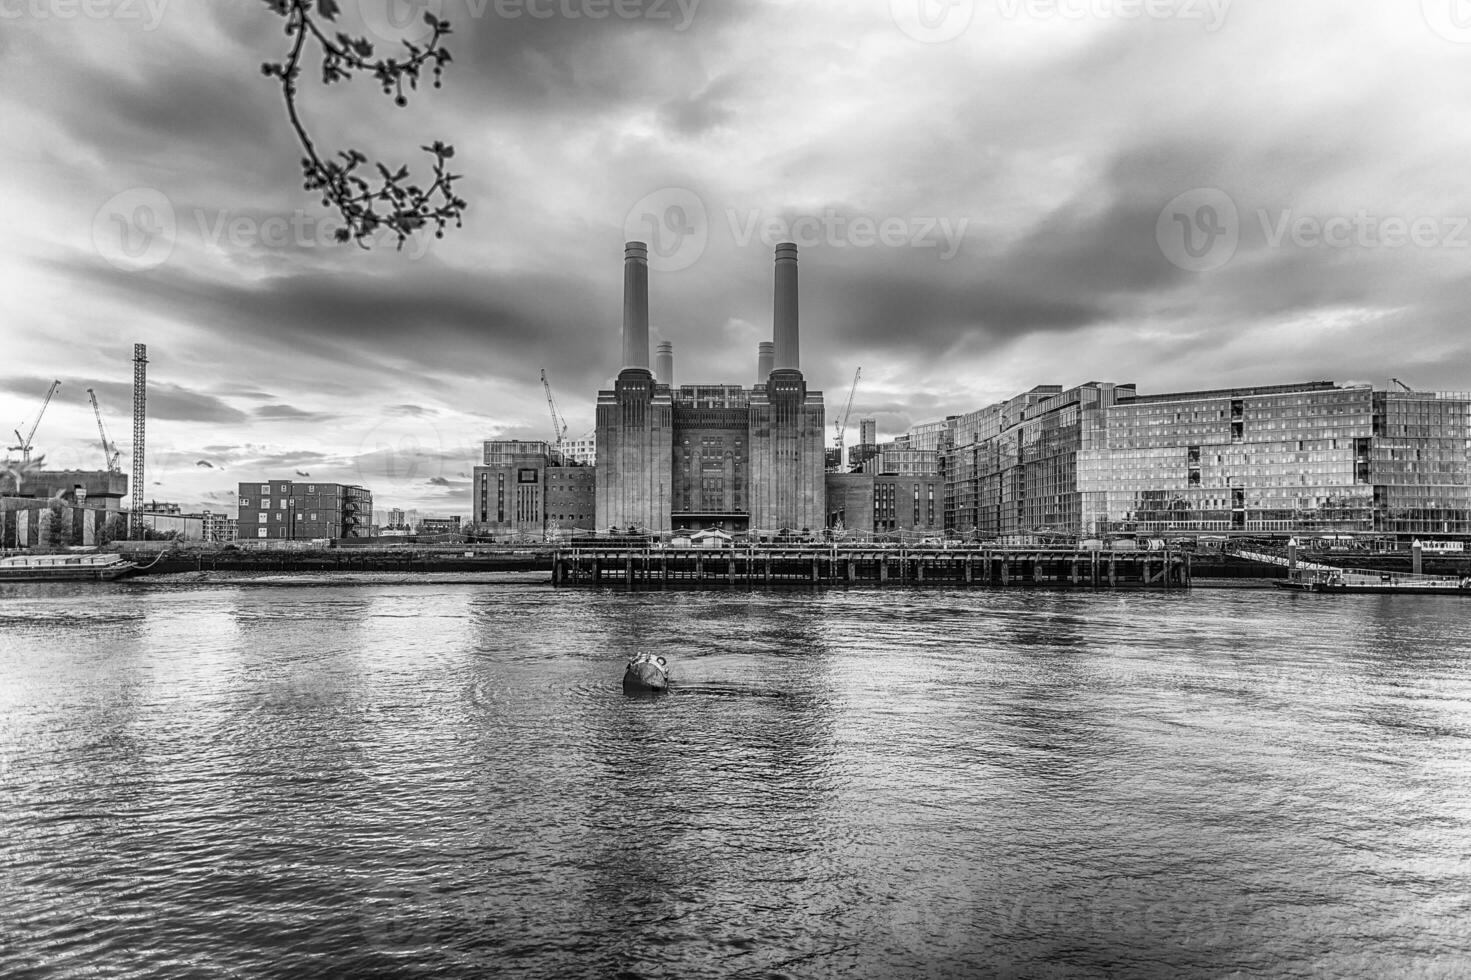 Battersea Power Station, iconic building and landmark in London, UK photo